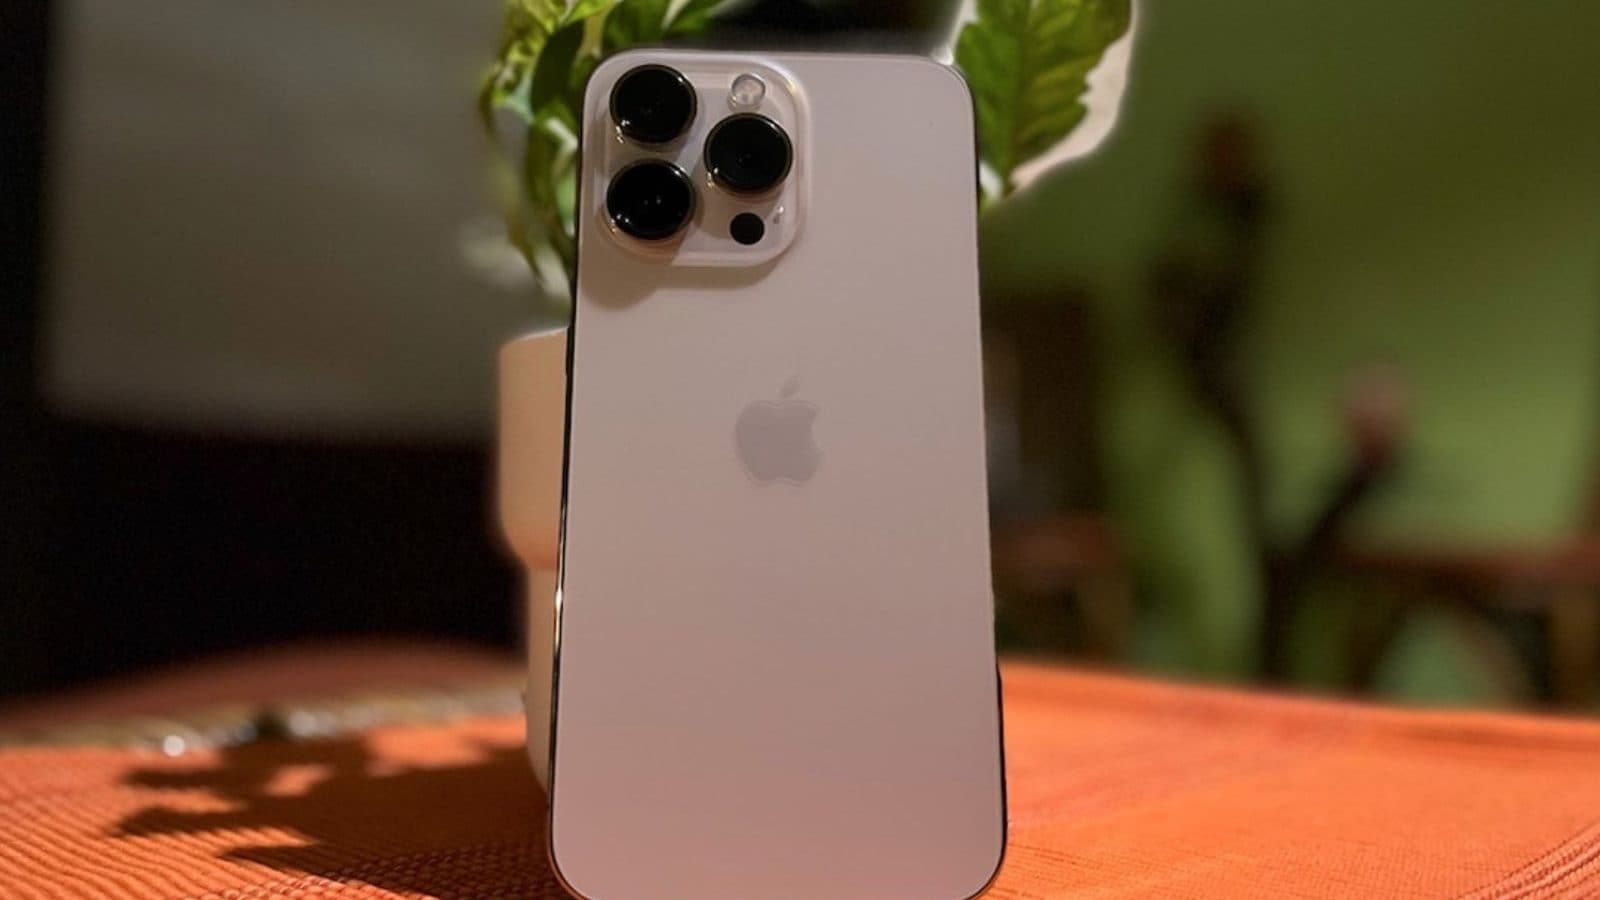 Apple May Finally Bring Periscope Lens To iPhones But Only For This Model